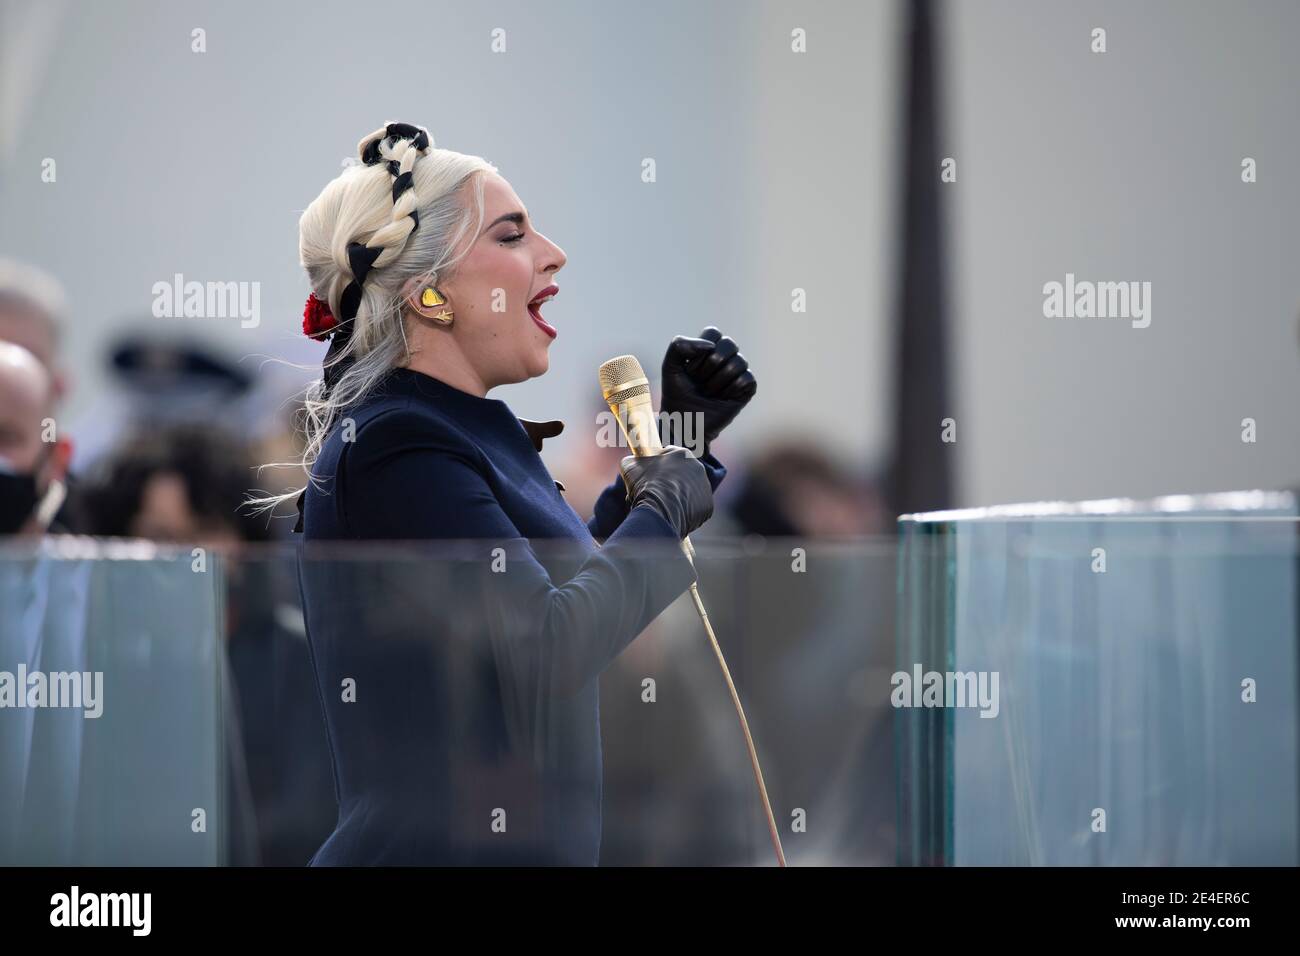 Washington, United States Of America. 20th Jan, 2021. Musical superstar Lady Gaga sings a rendition of The Star-Spangled Banner during the 59th Presidential Inauguration ceremony at the West Front of the U.S. Capitol January 20, 2021 in Washington, DC Credit: Planetpix/Alamy Live News Stock Photo